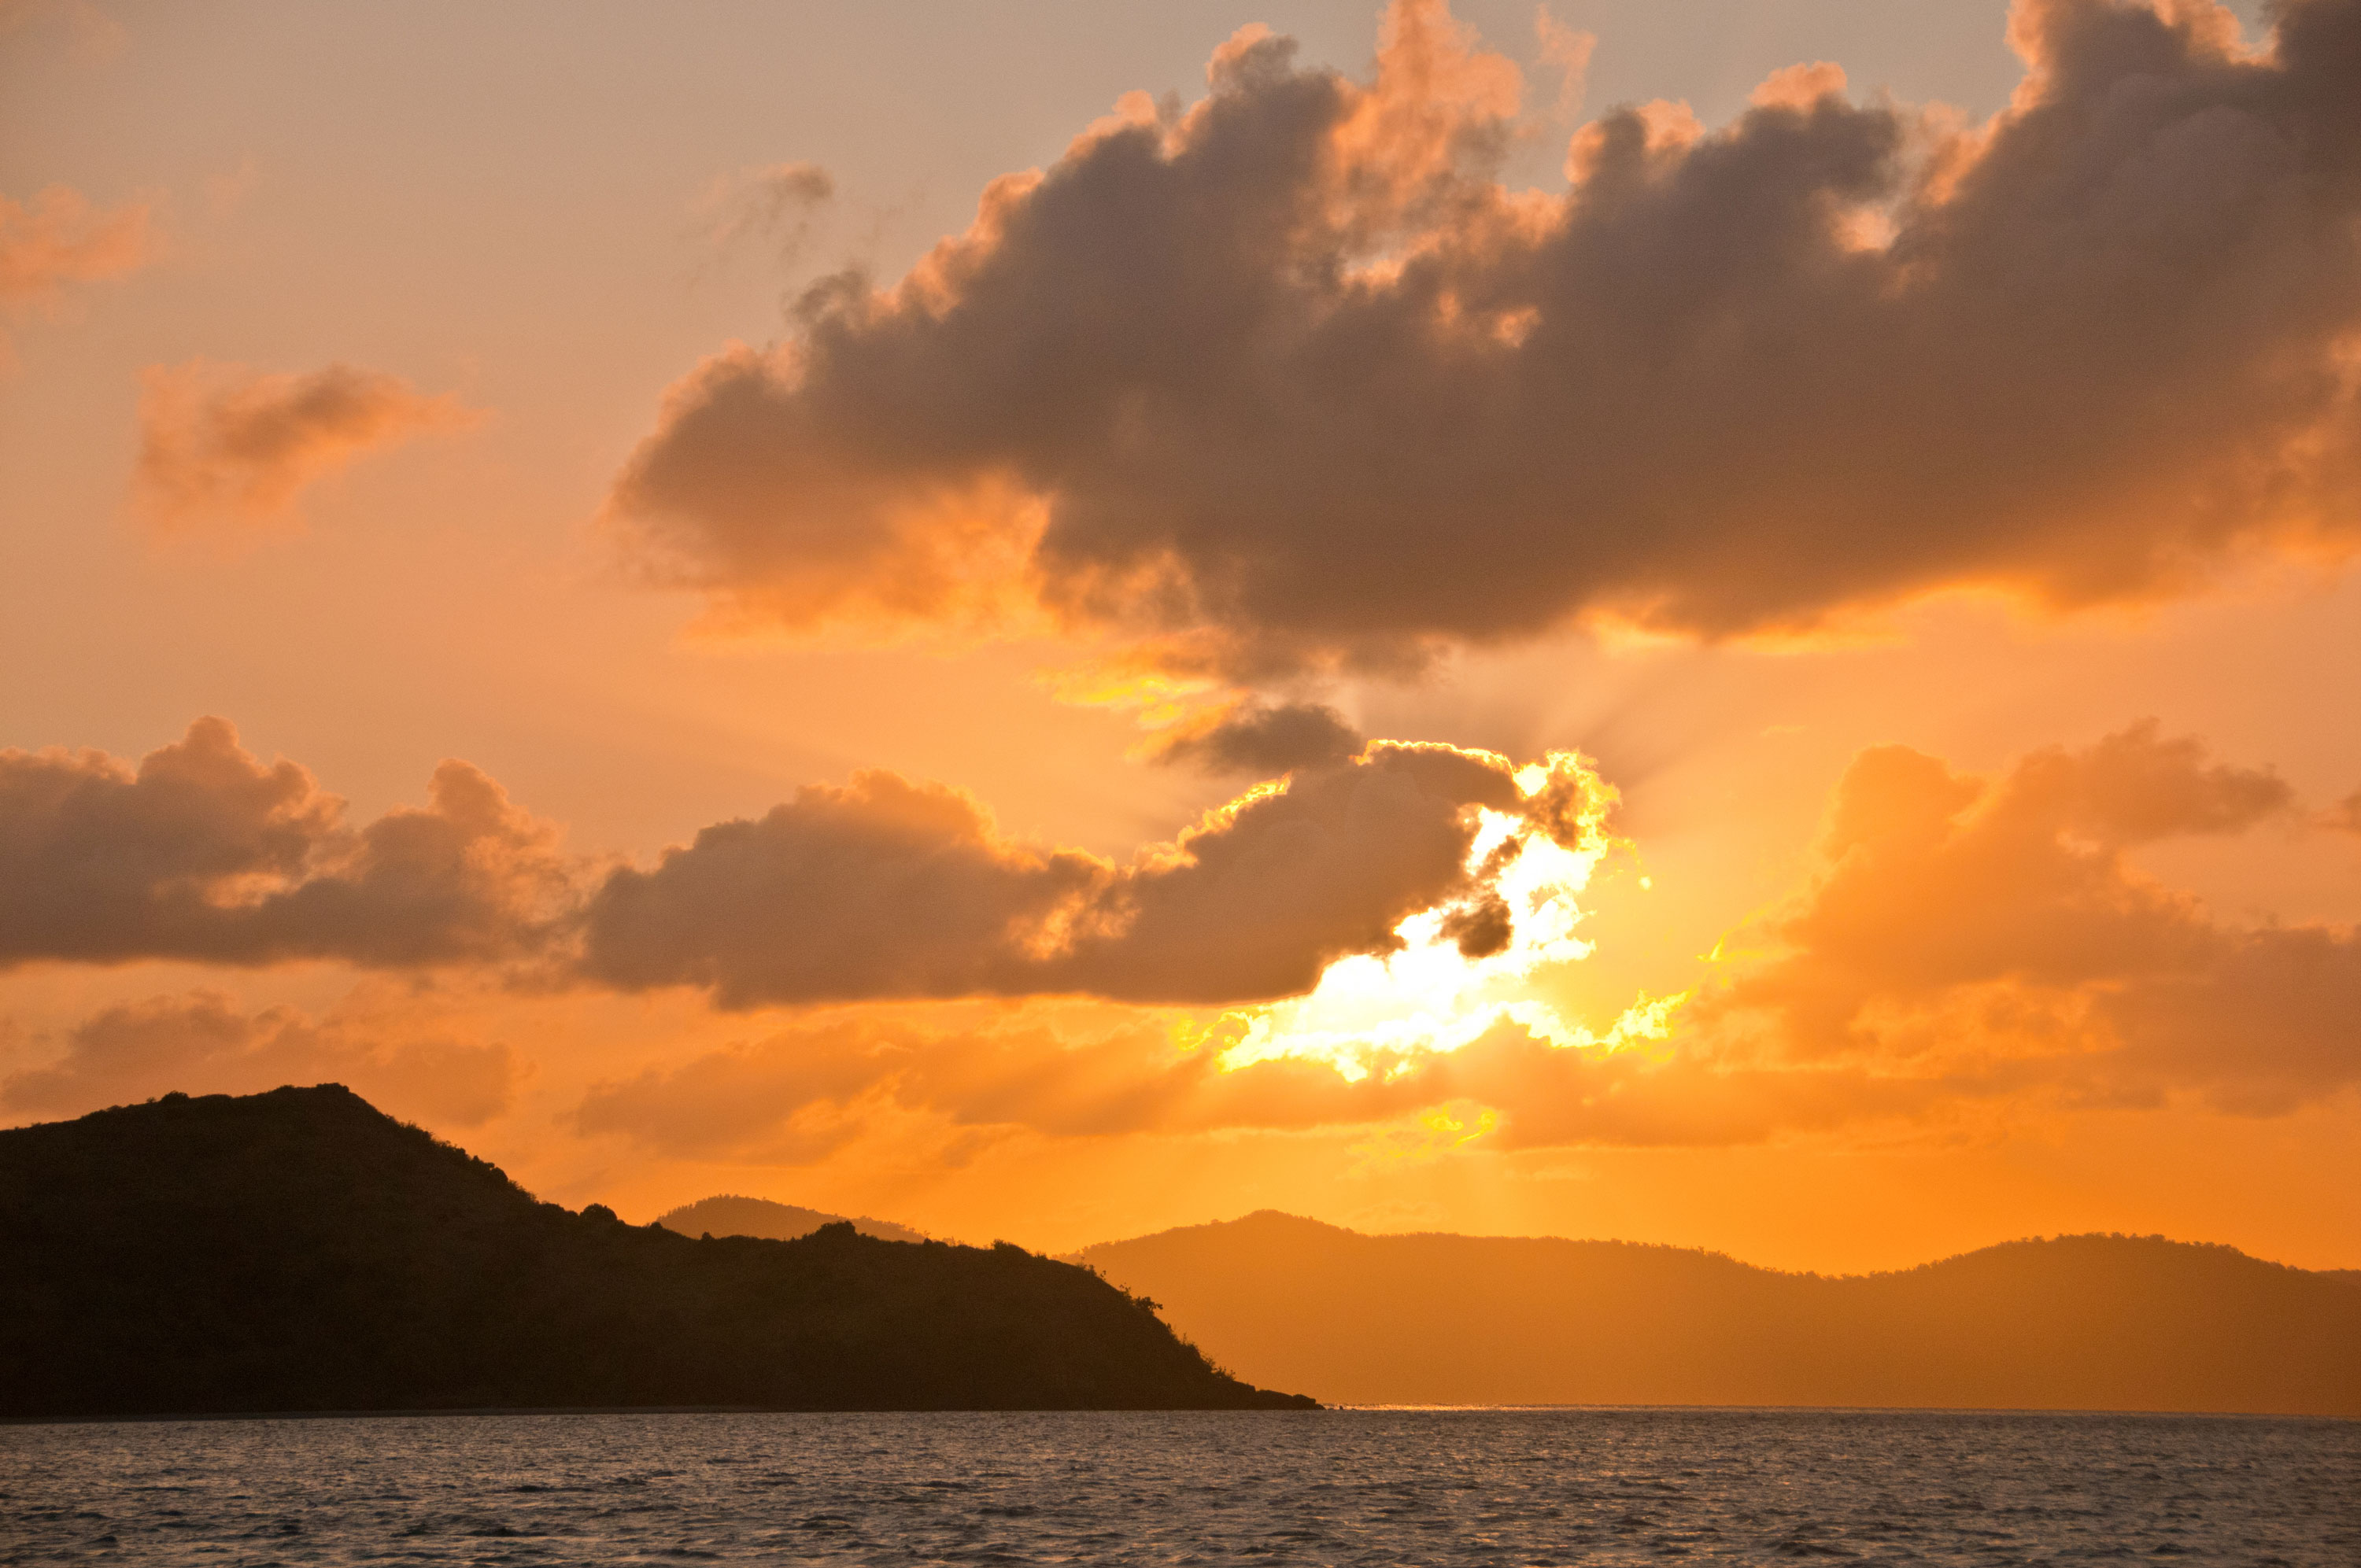 Top 5 Sunset Spots on the Island